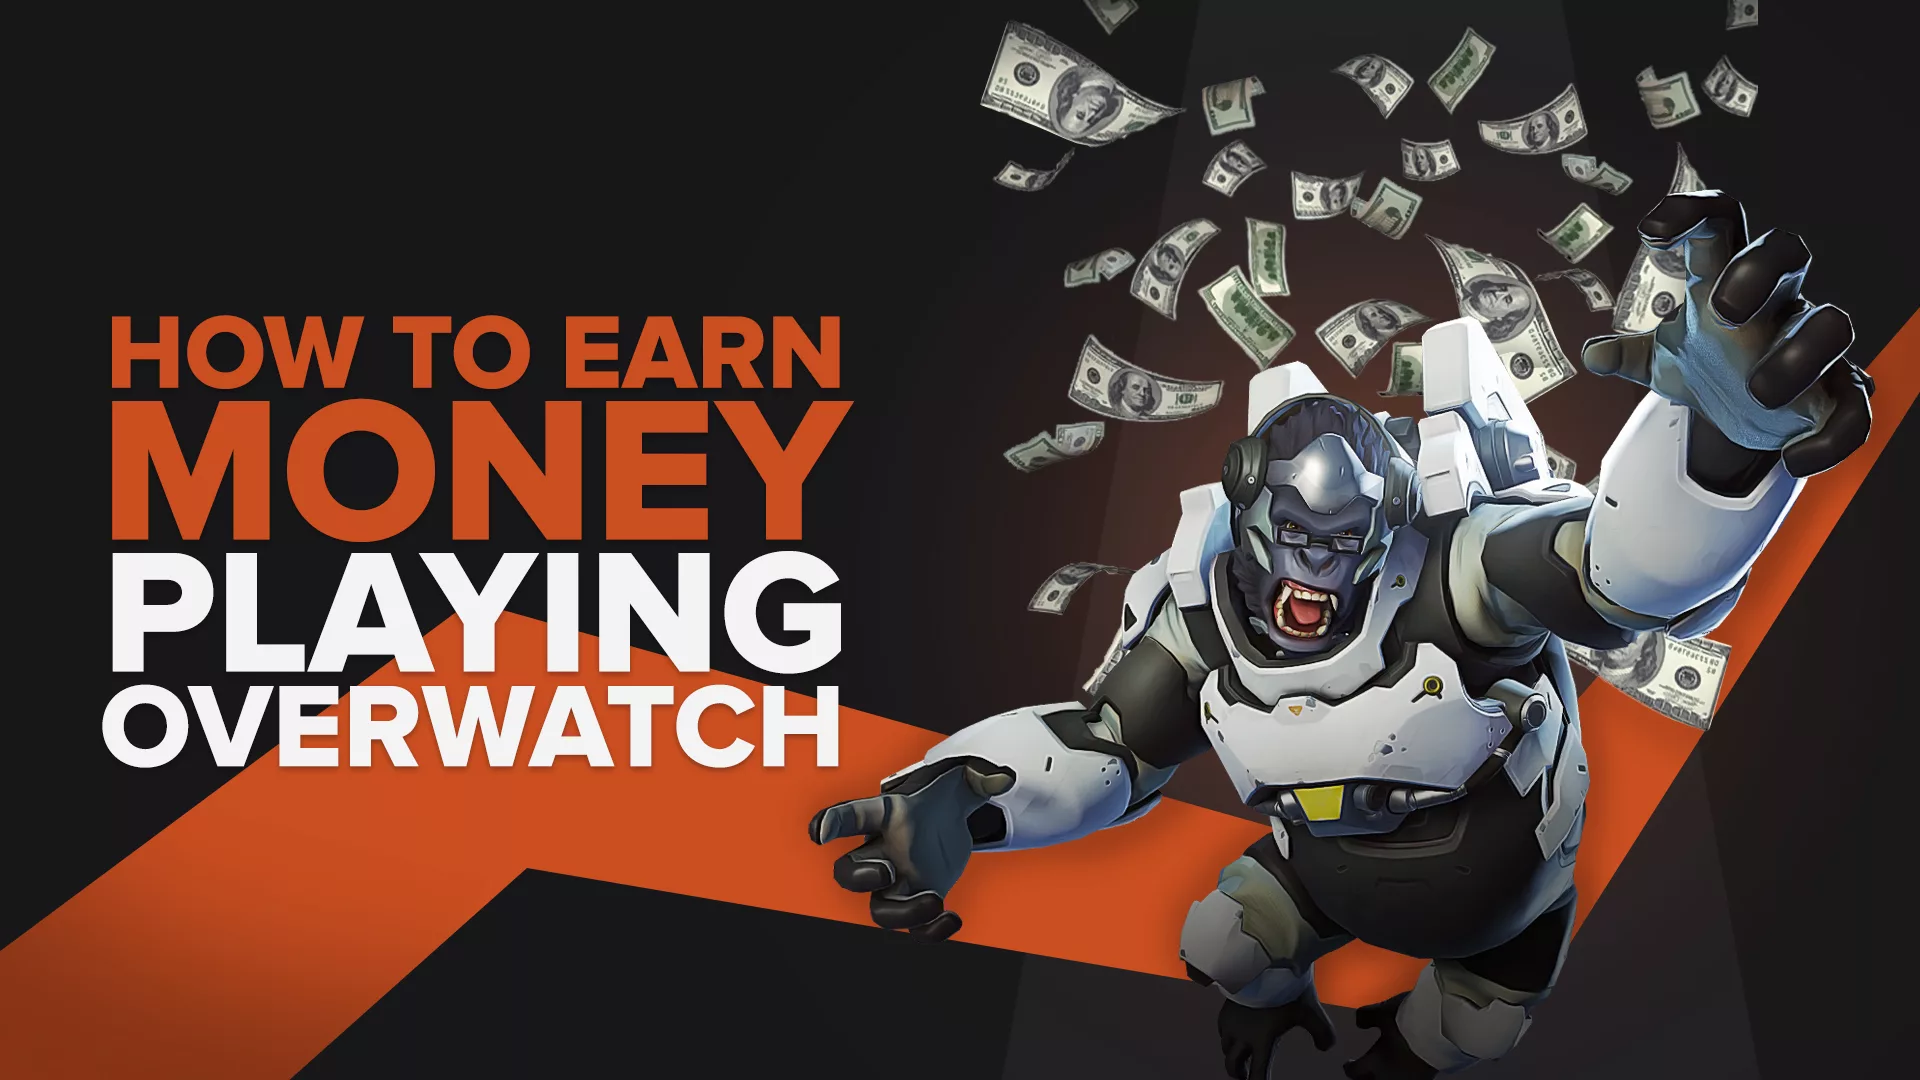 How To Earn Money Playing Overwatch (4 Legit Ways)